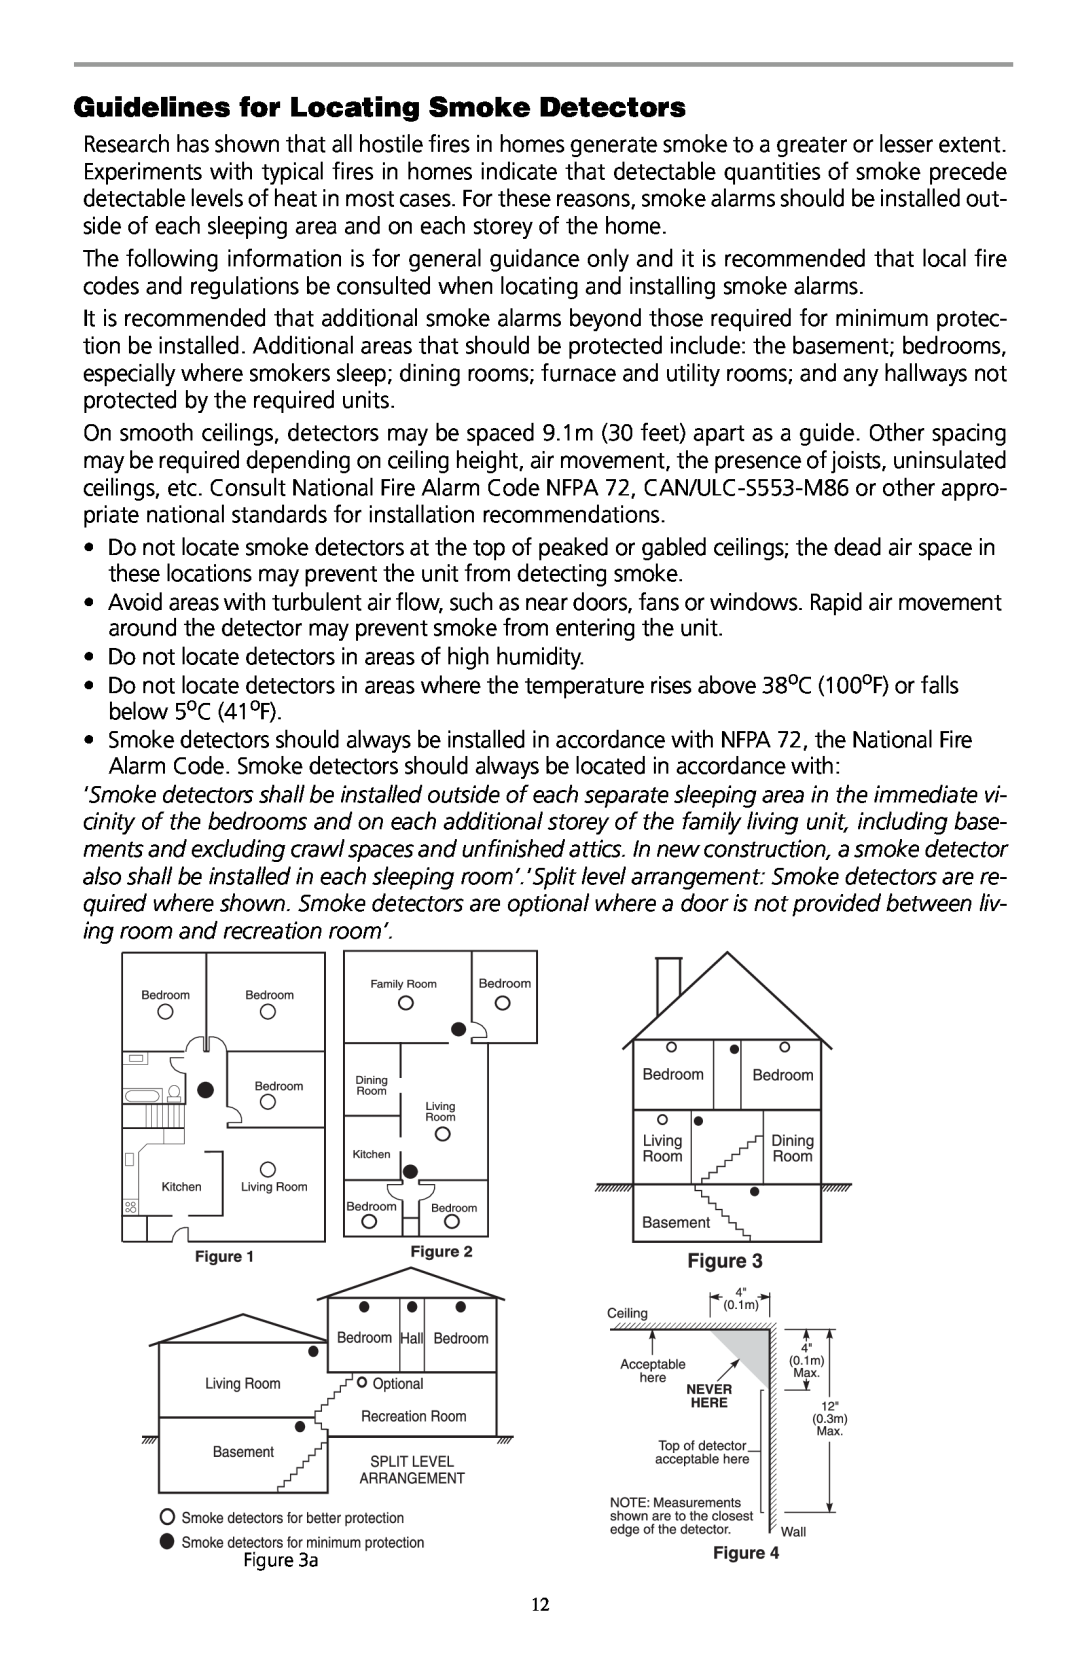 ADT Security Services SCW9045-433, SCW9047-433 manual Guidelines for Locating Smoke Detectors 